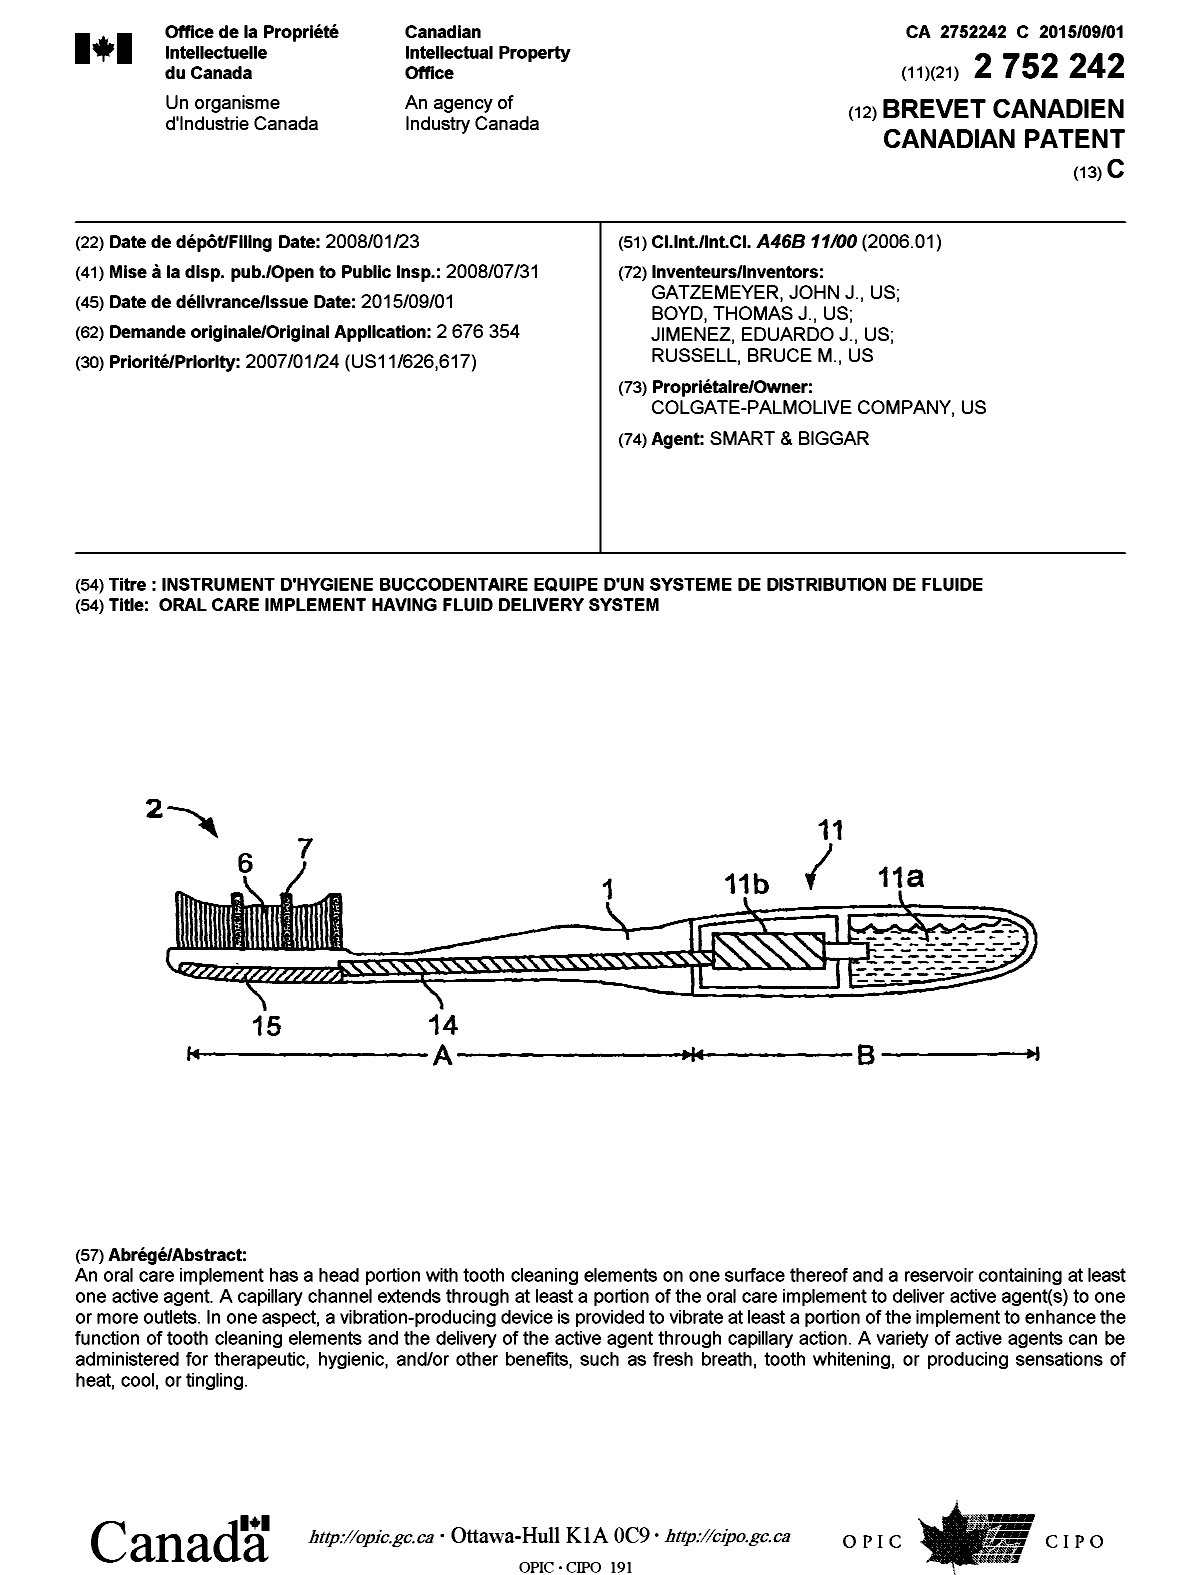 Canadian Patent Document 2752242. Cover Page 20150729. Image 1 of 1